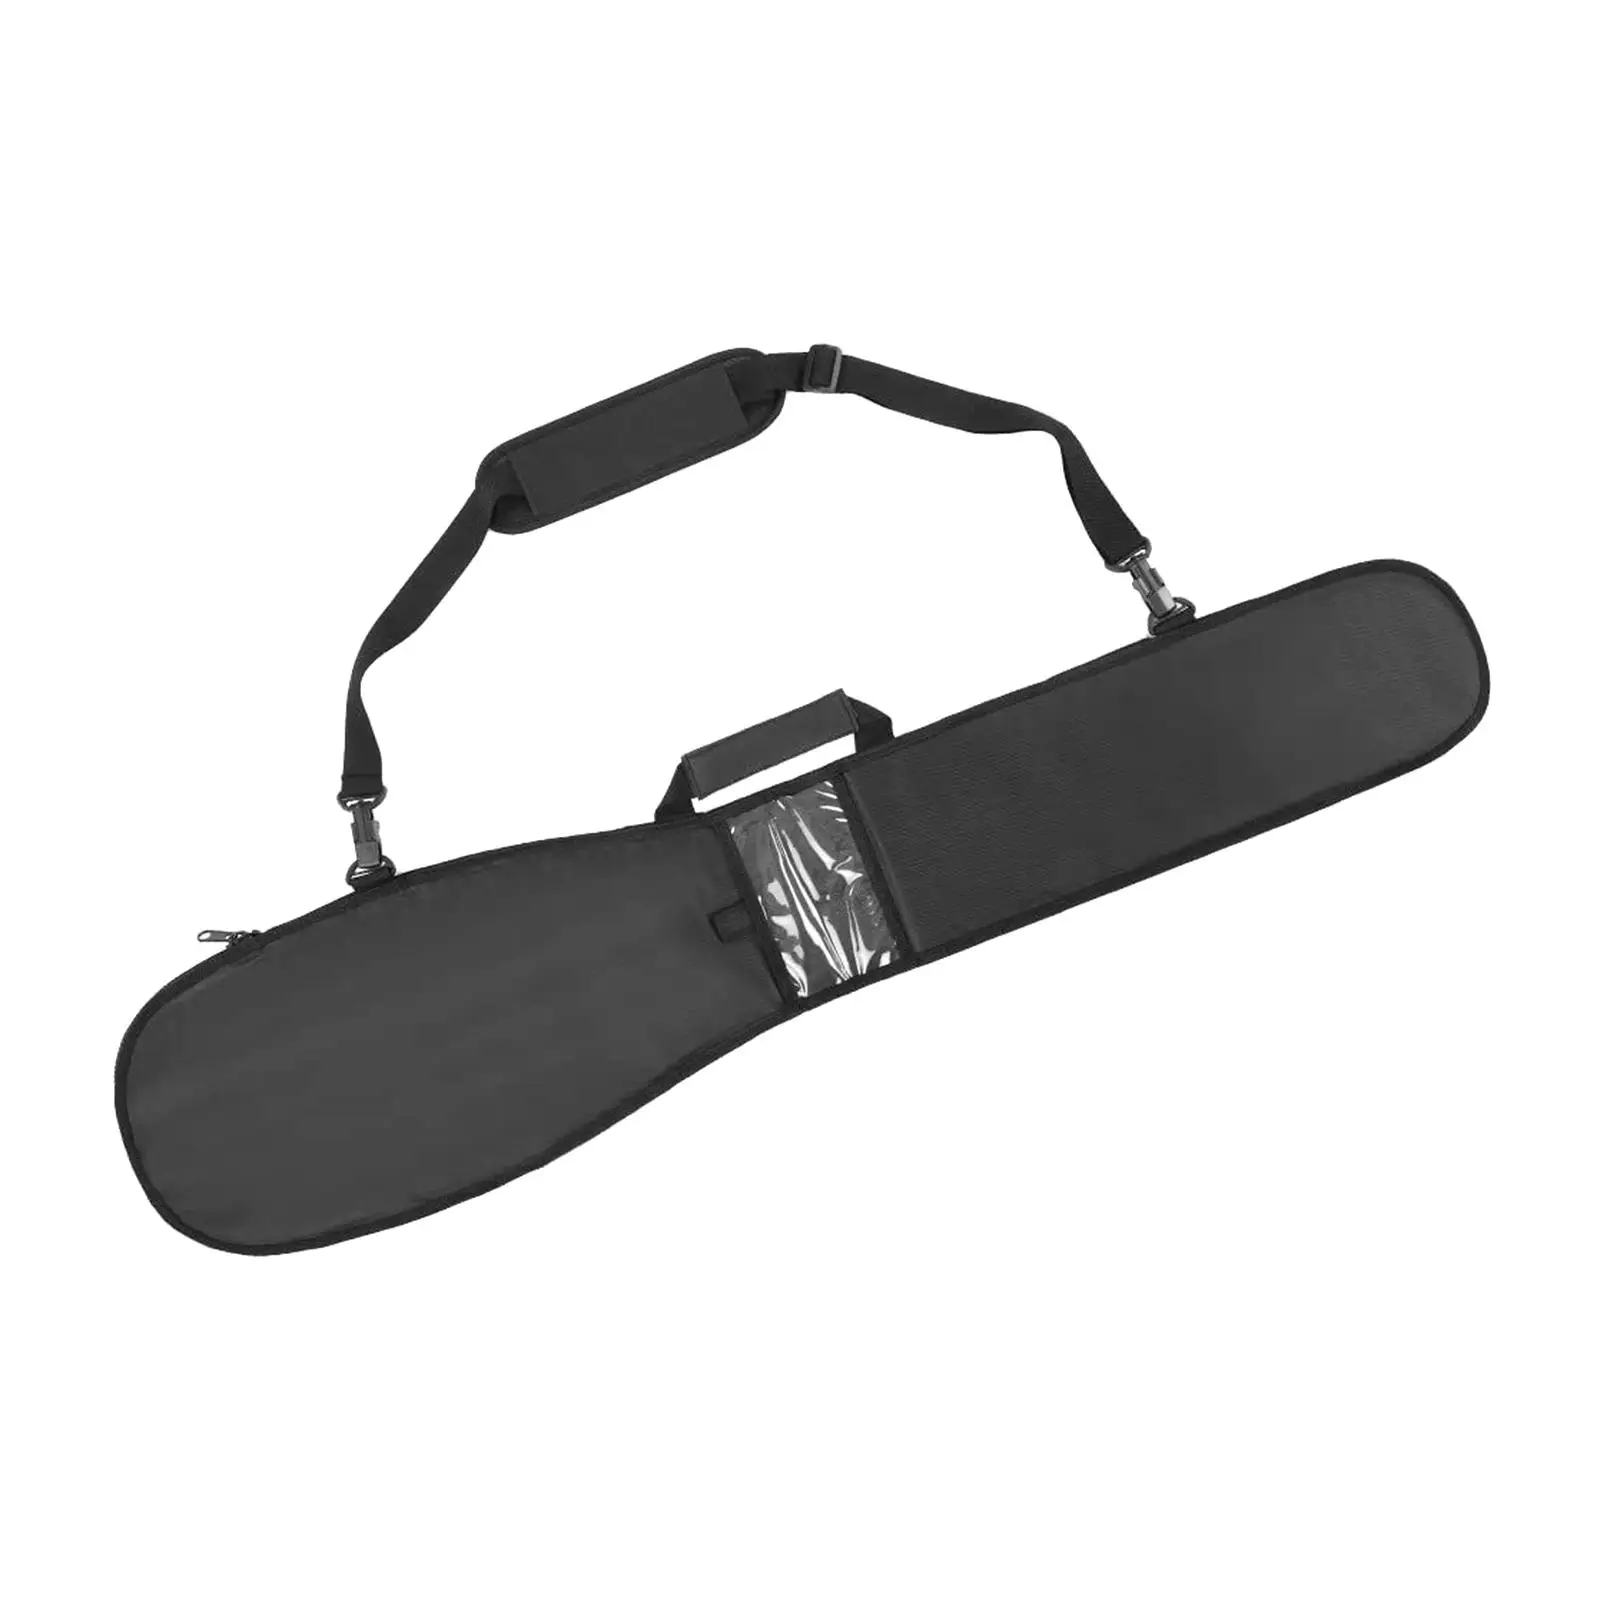 Paddle Bag Waterproof Oxford Cloth Pouch Paddle Storage Bag for Surfing Kayak Surfboarding Inflatable Boat Storage And